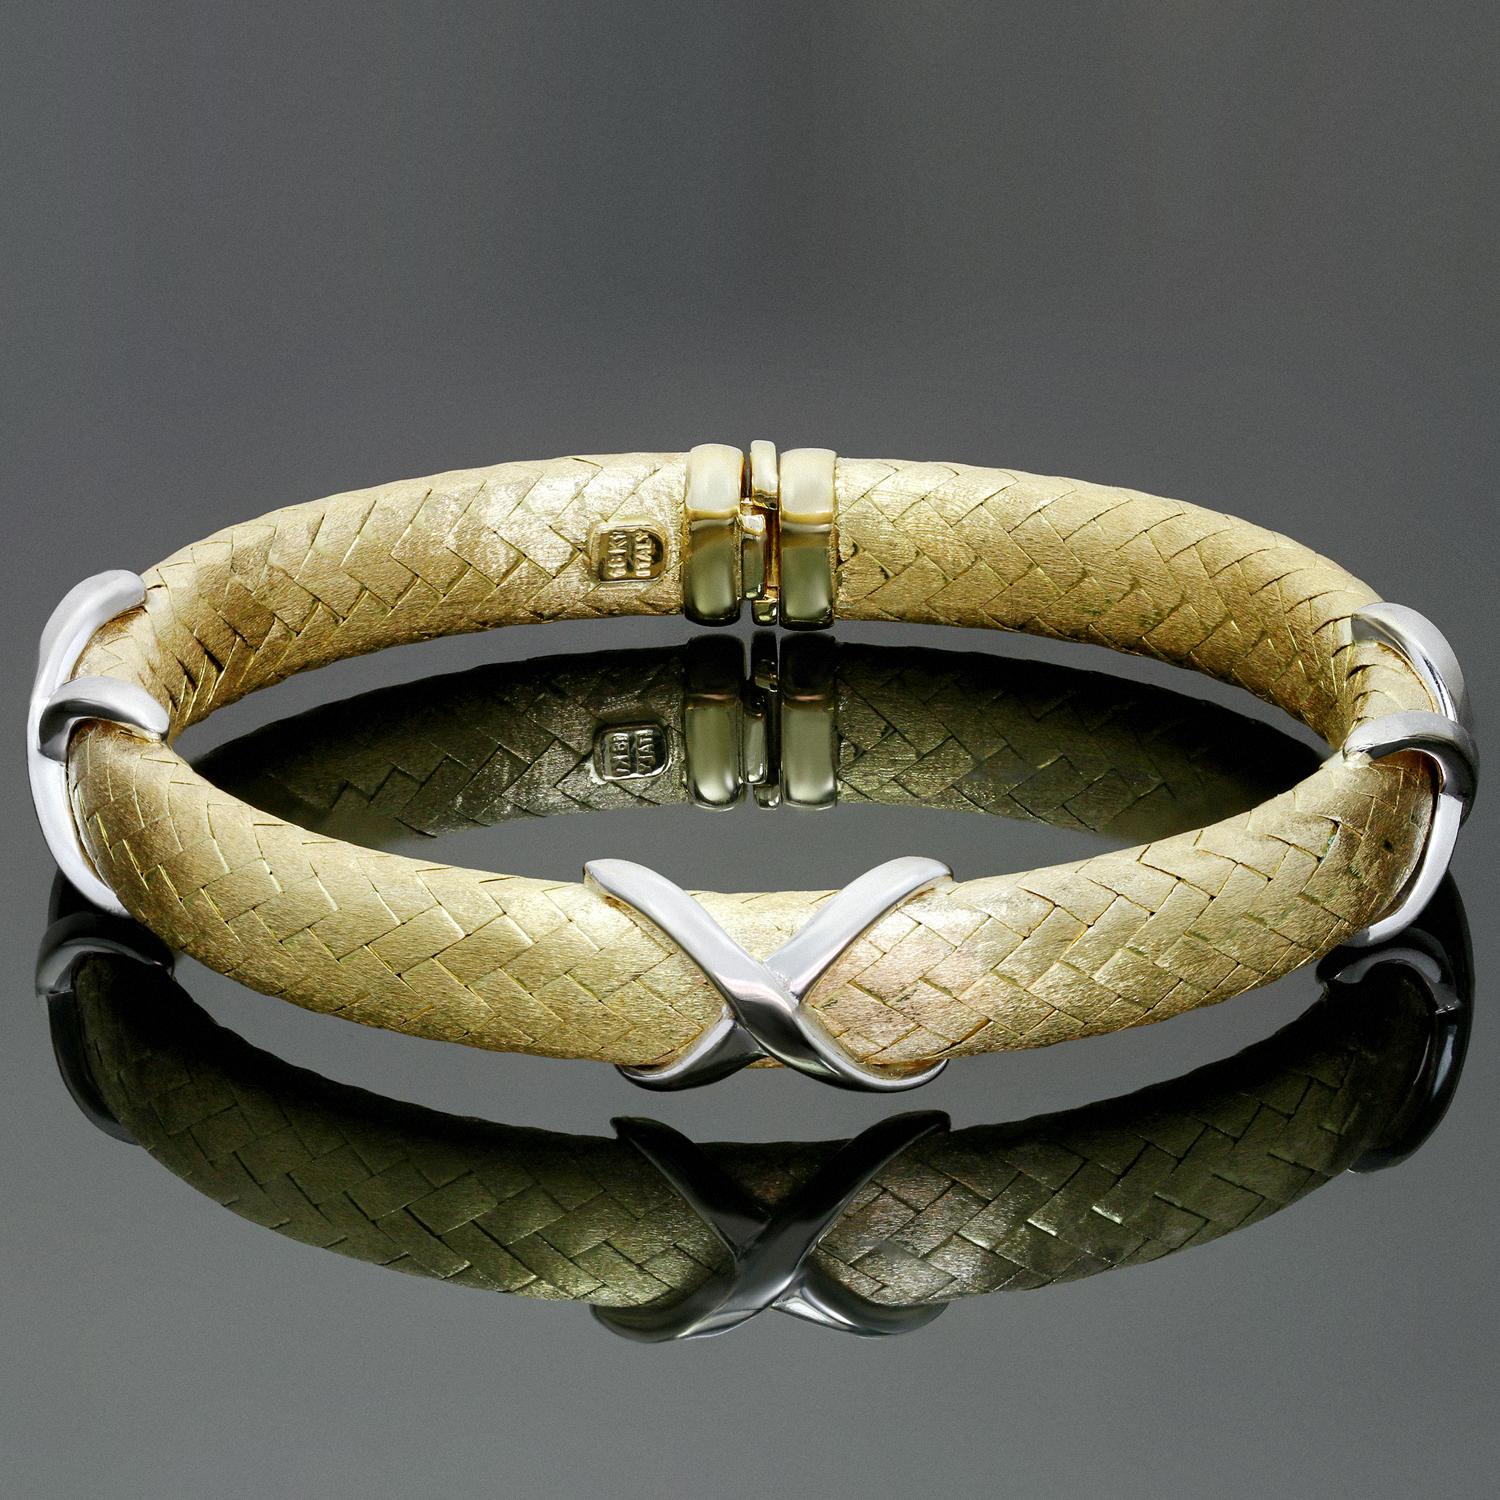 This classic flexible bracelet is crafted in textured 18k yellow gold and accented with X motifs in polished white gold. Makers mark ZRW. Made in Italy circa 1980s. Measurements: 0.51